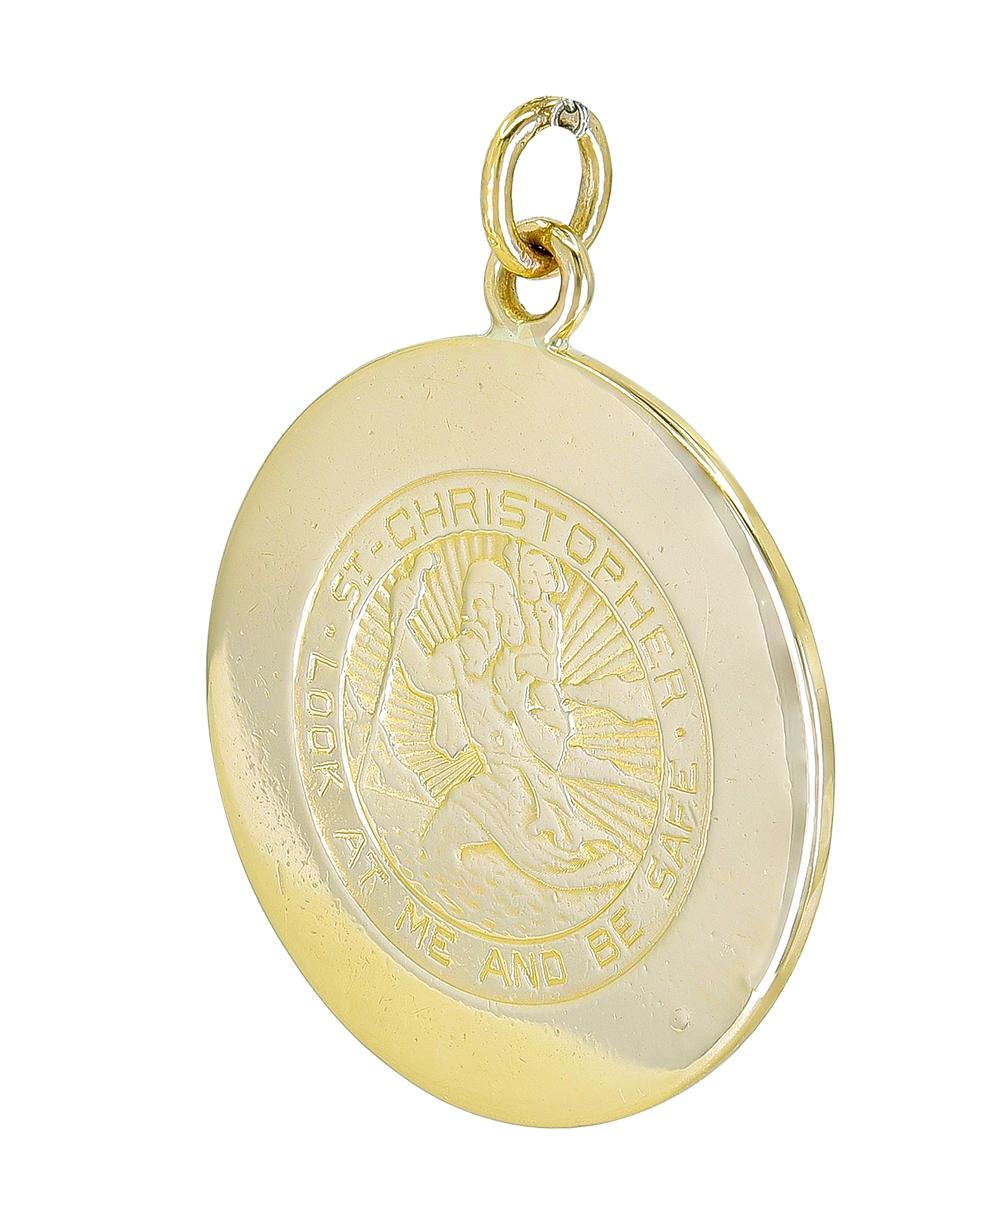 Rare Cartier New York Large St. Christopher medal.  Iconic image of St. Christopher holding a child in foreground, background of radiating line pattern bordered by phrase 